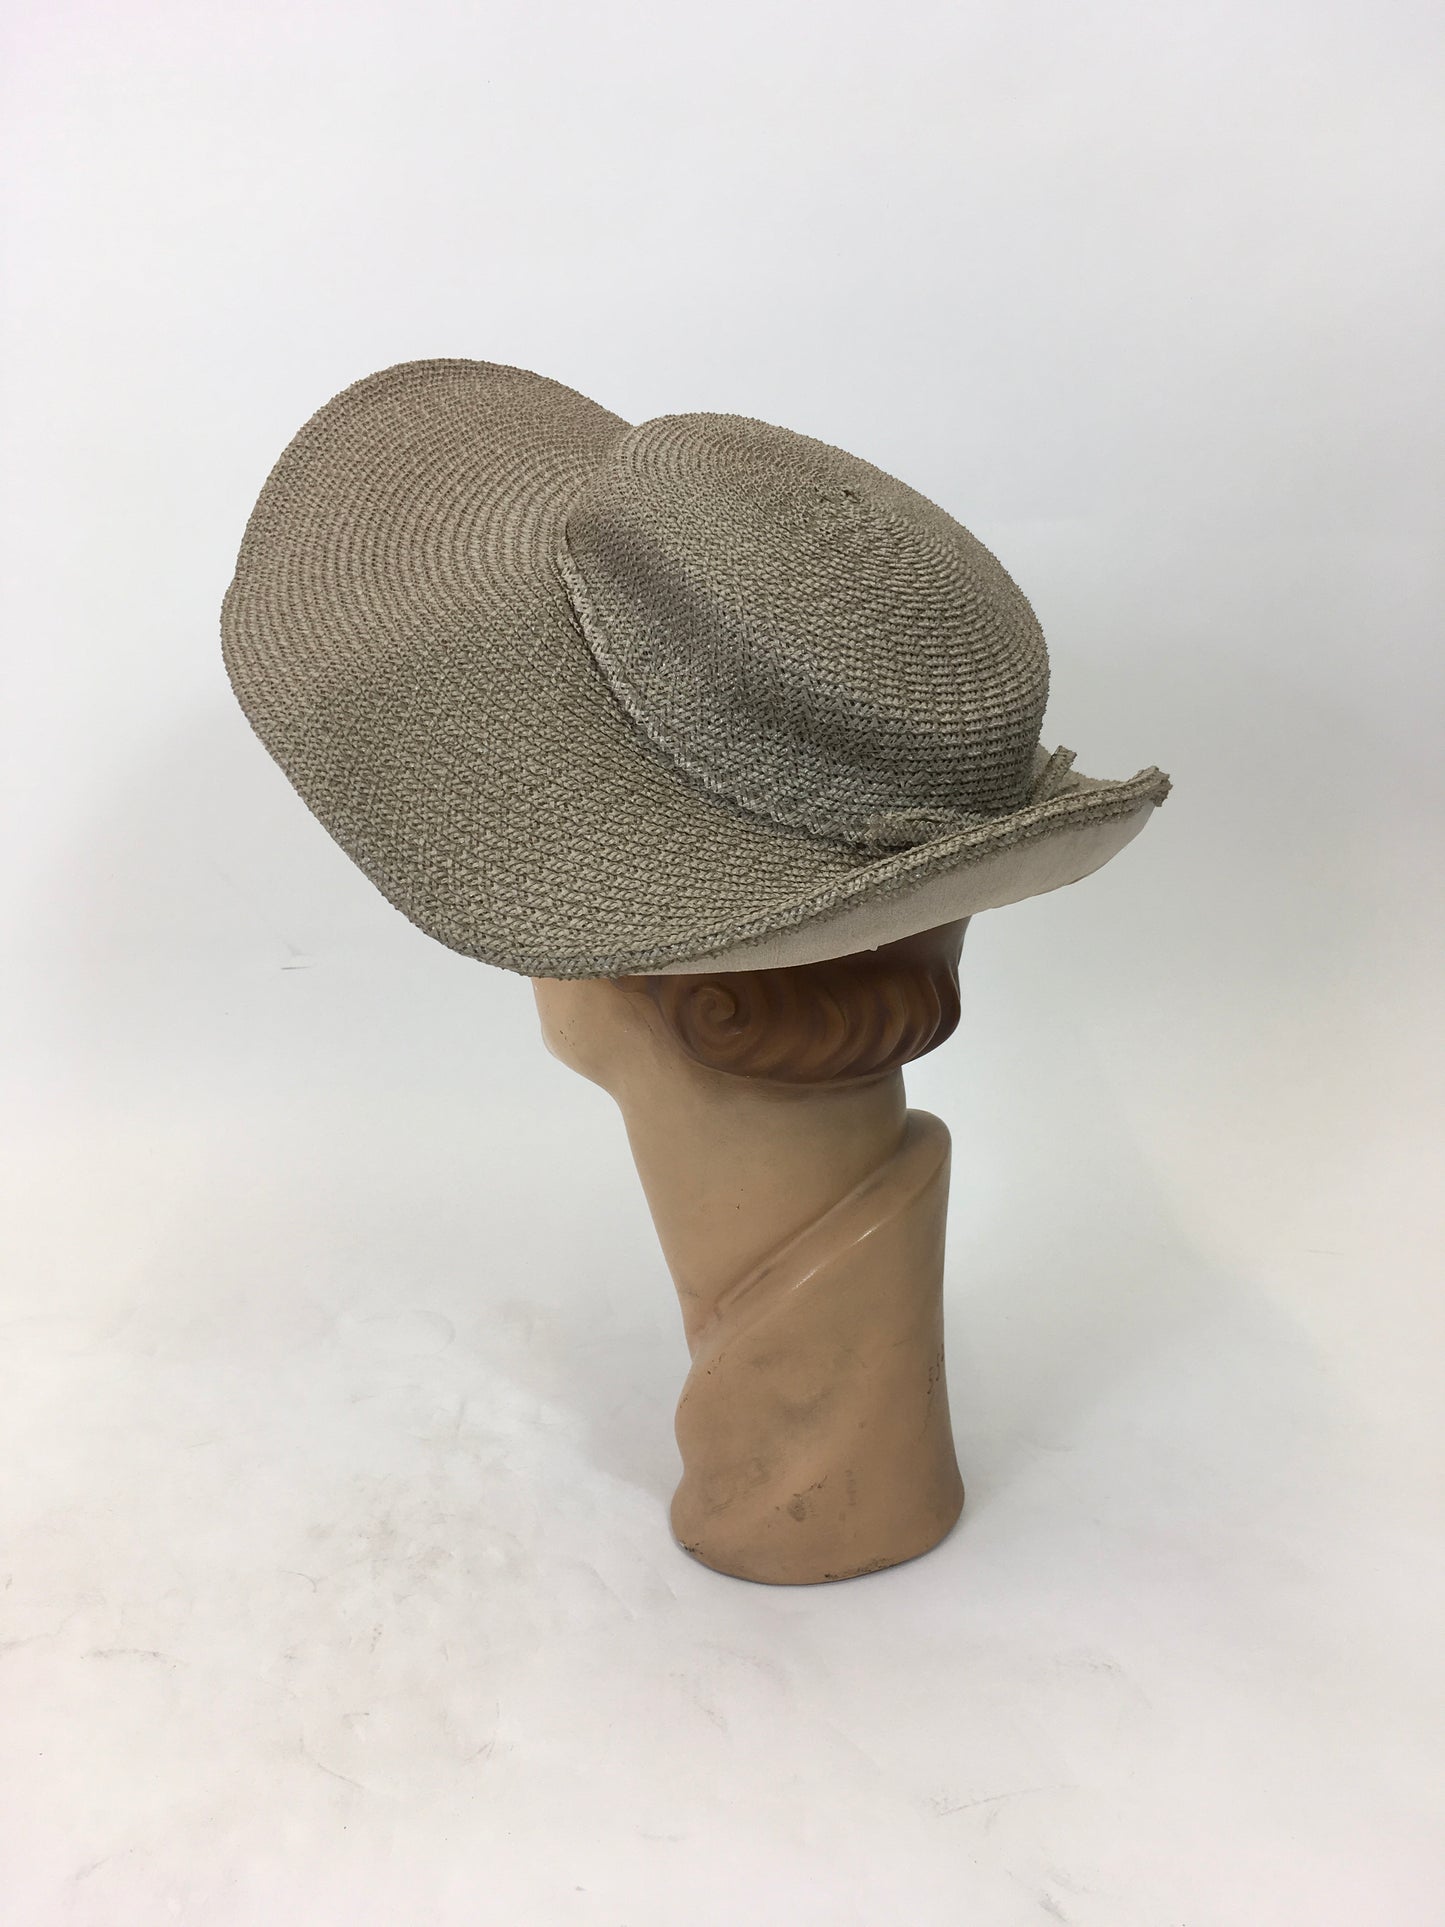 Original 1940's Fabulous Woven Raffia Hat - In A Soft Mushroom With Back Bow Detailing